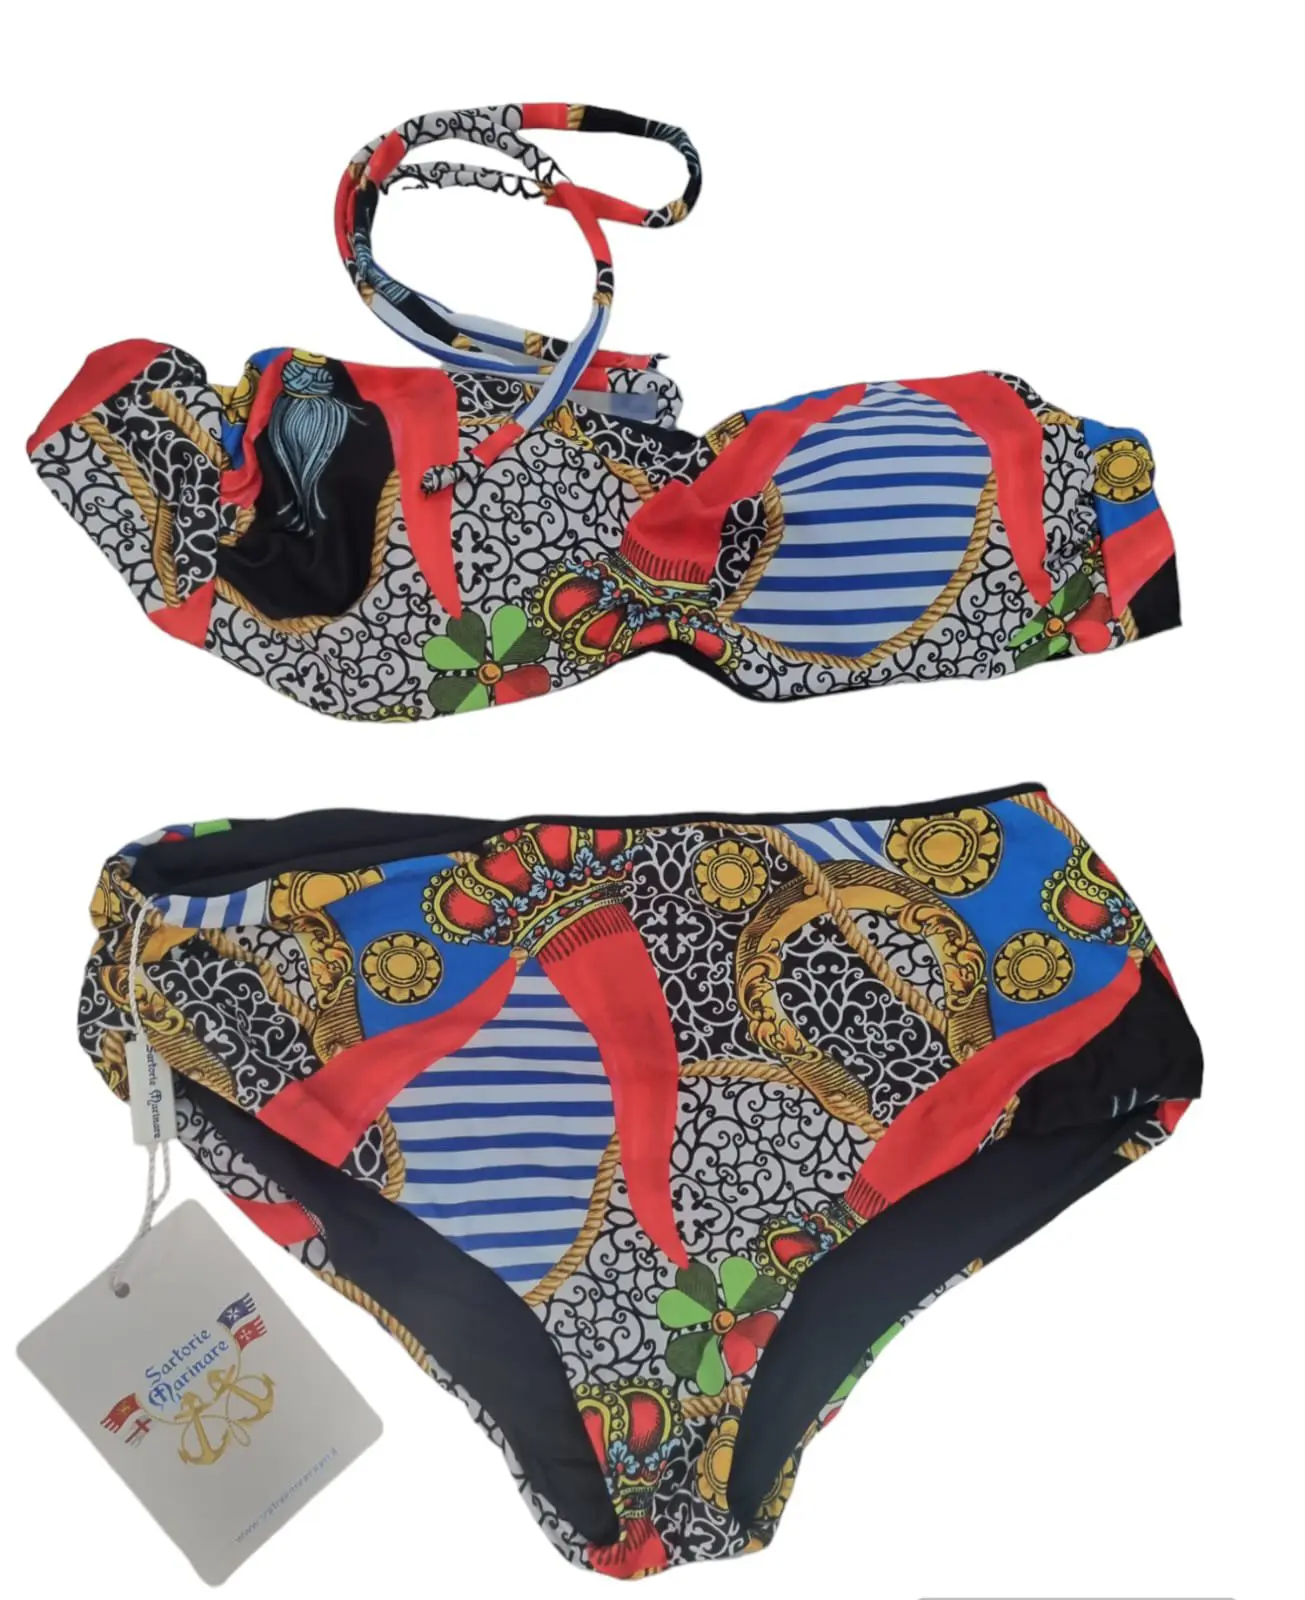 Double-sided bandeau bikini with the possibility of inserting laces, culotte briefs. Horns and black pattern